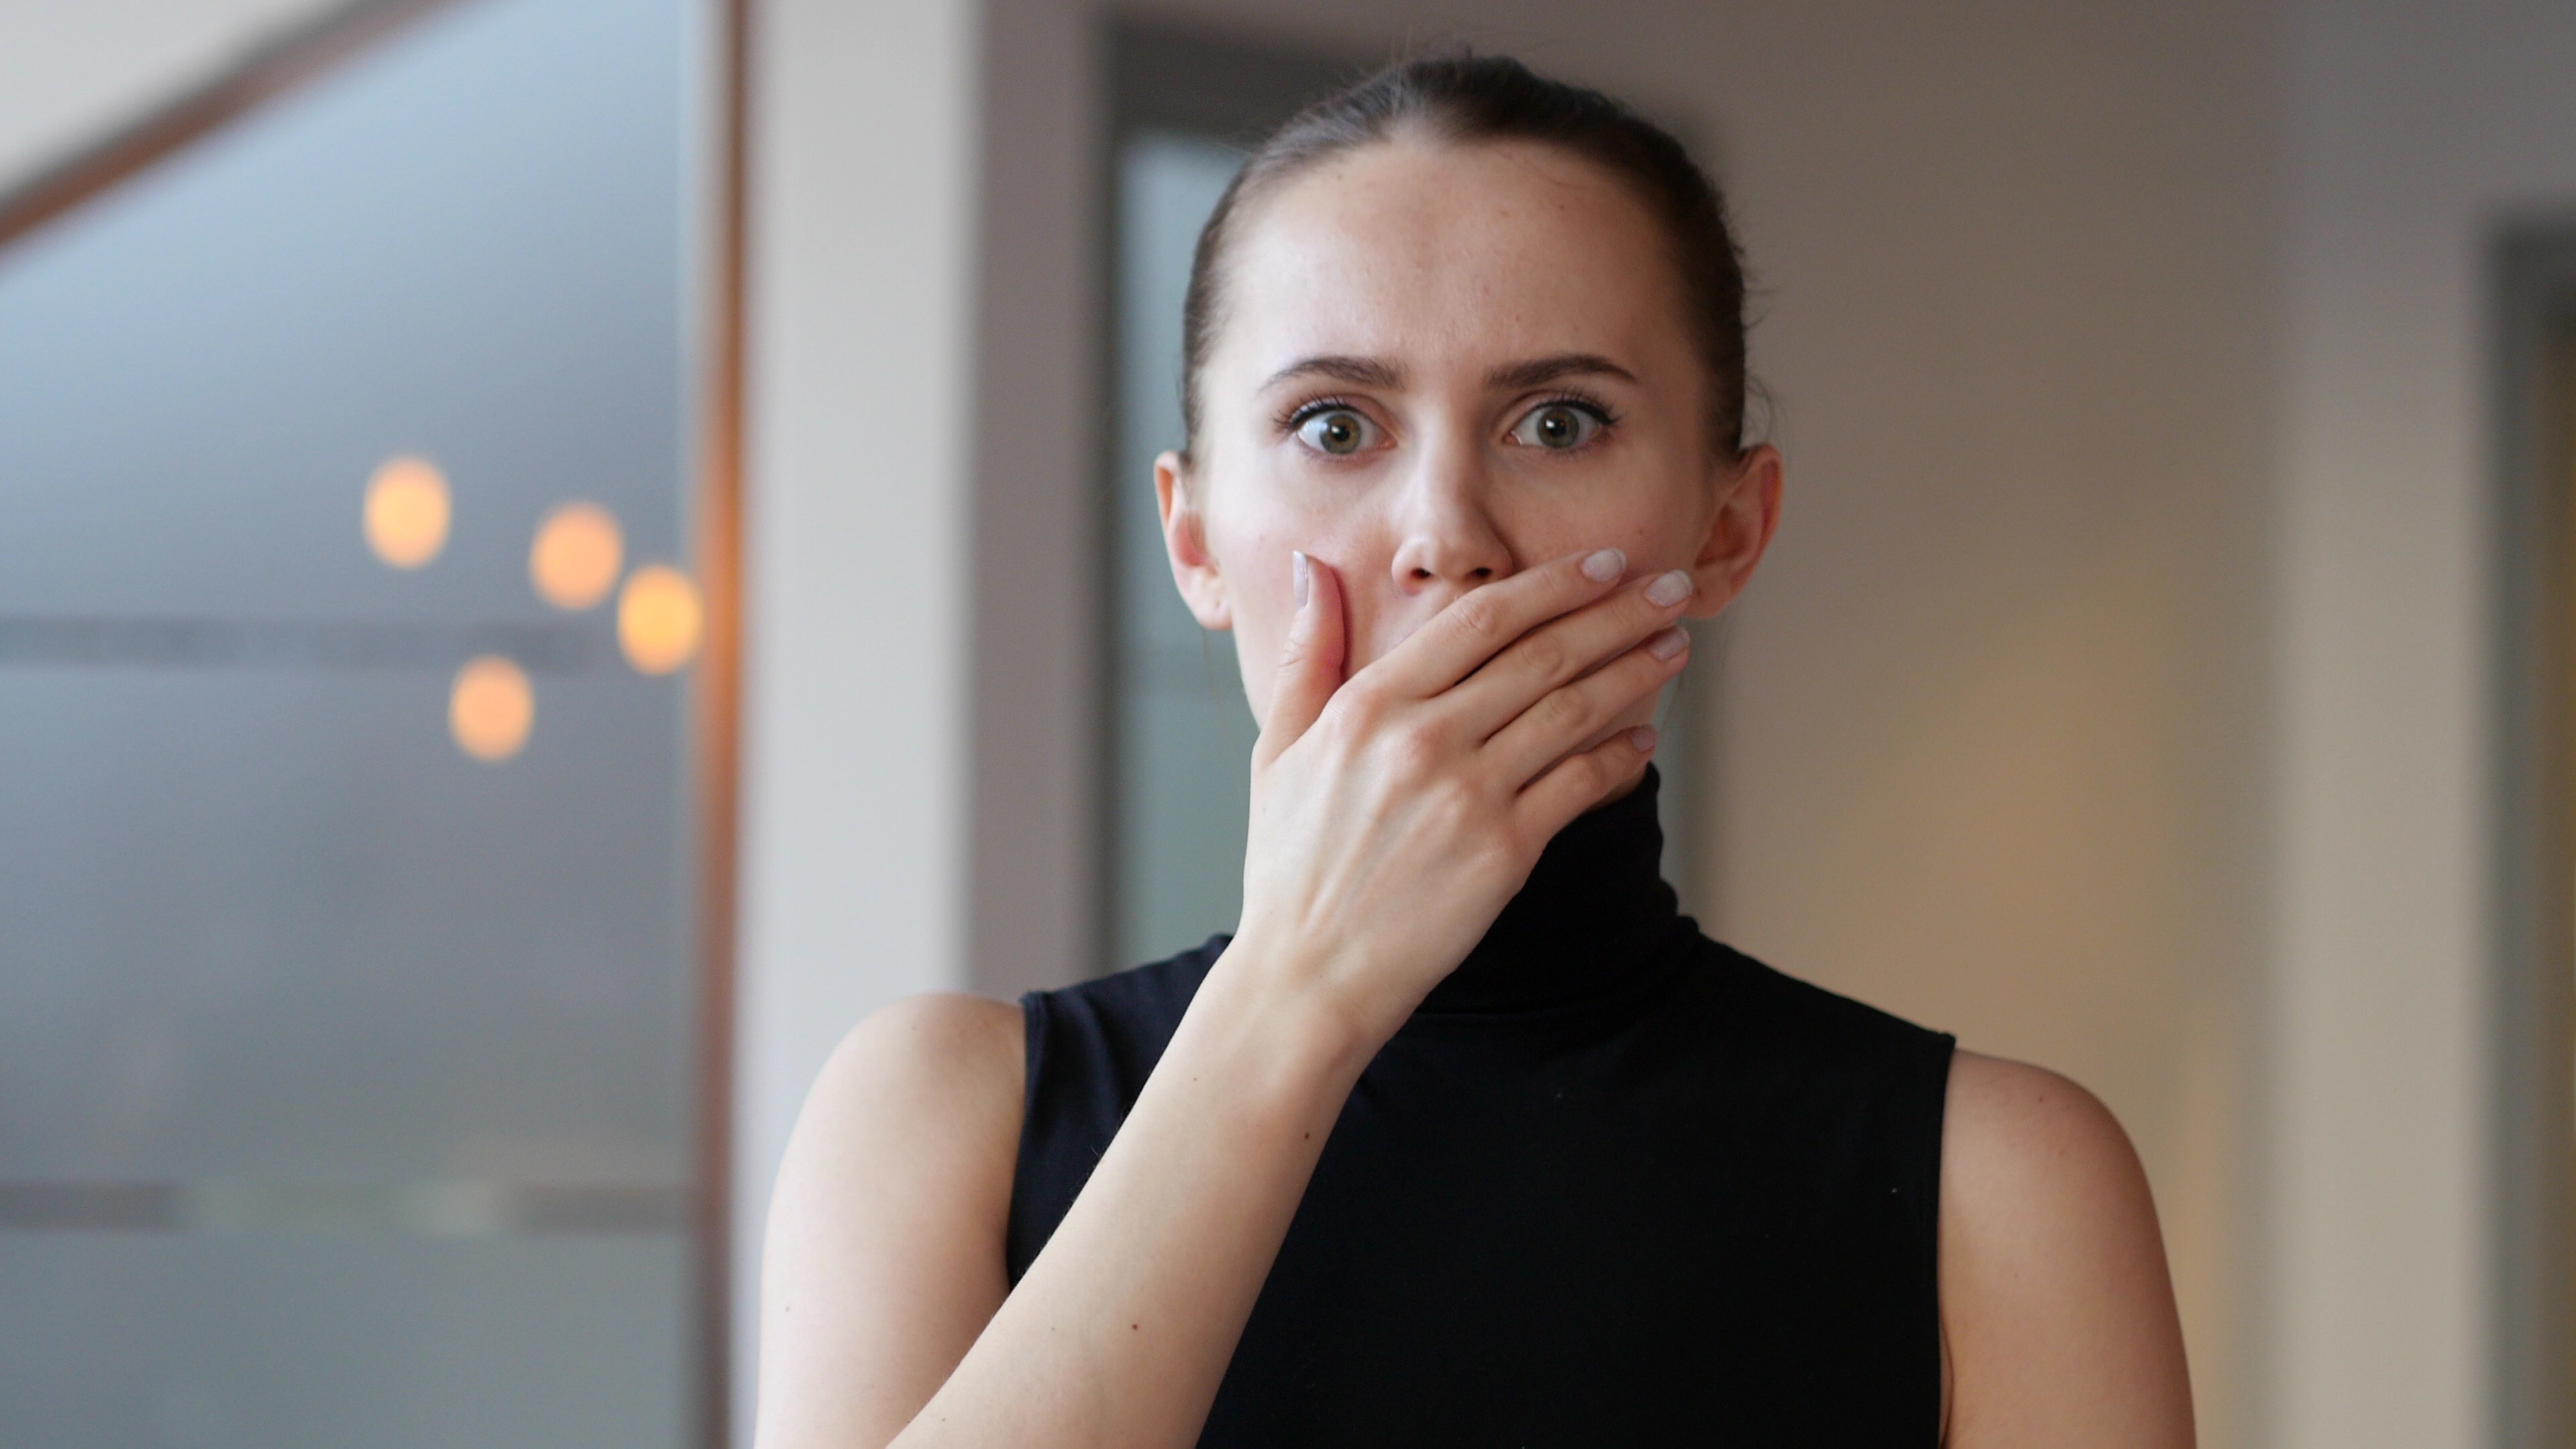 A young woman shocked | Source: Shutterstock